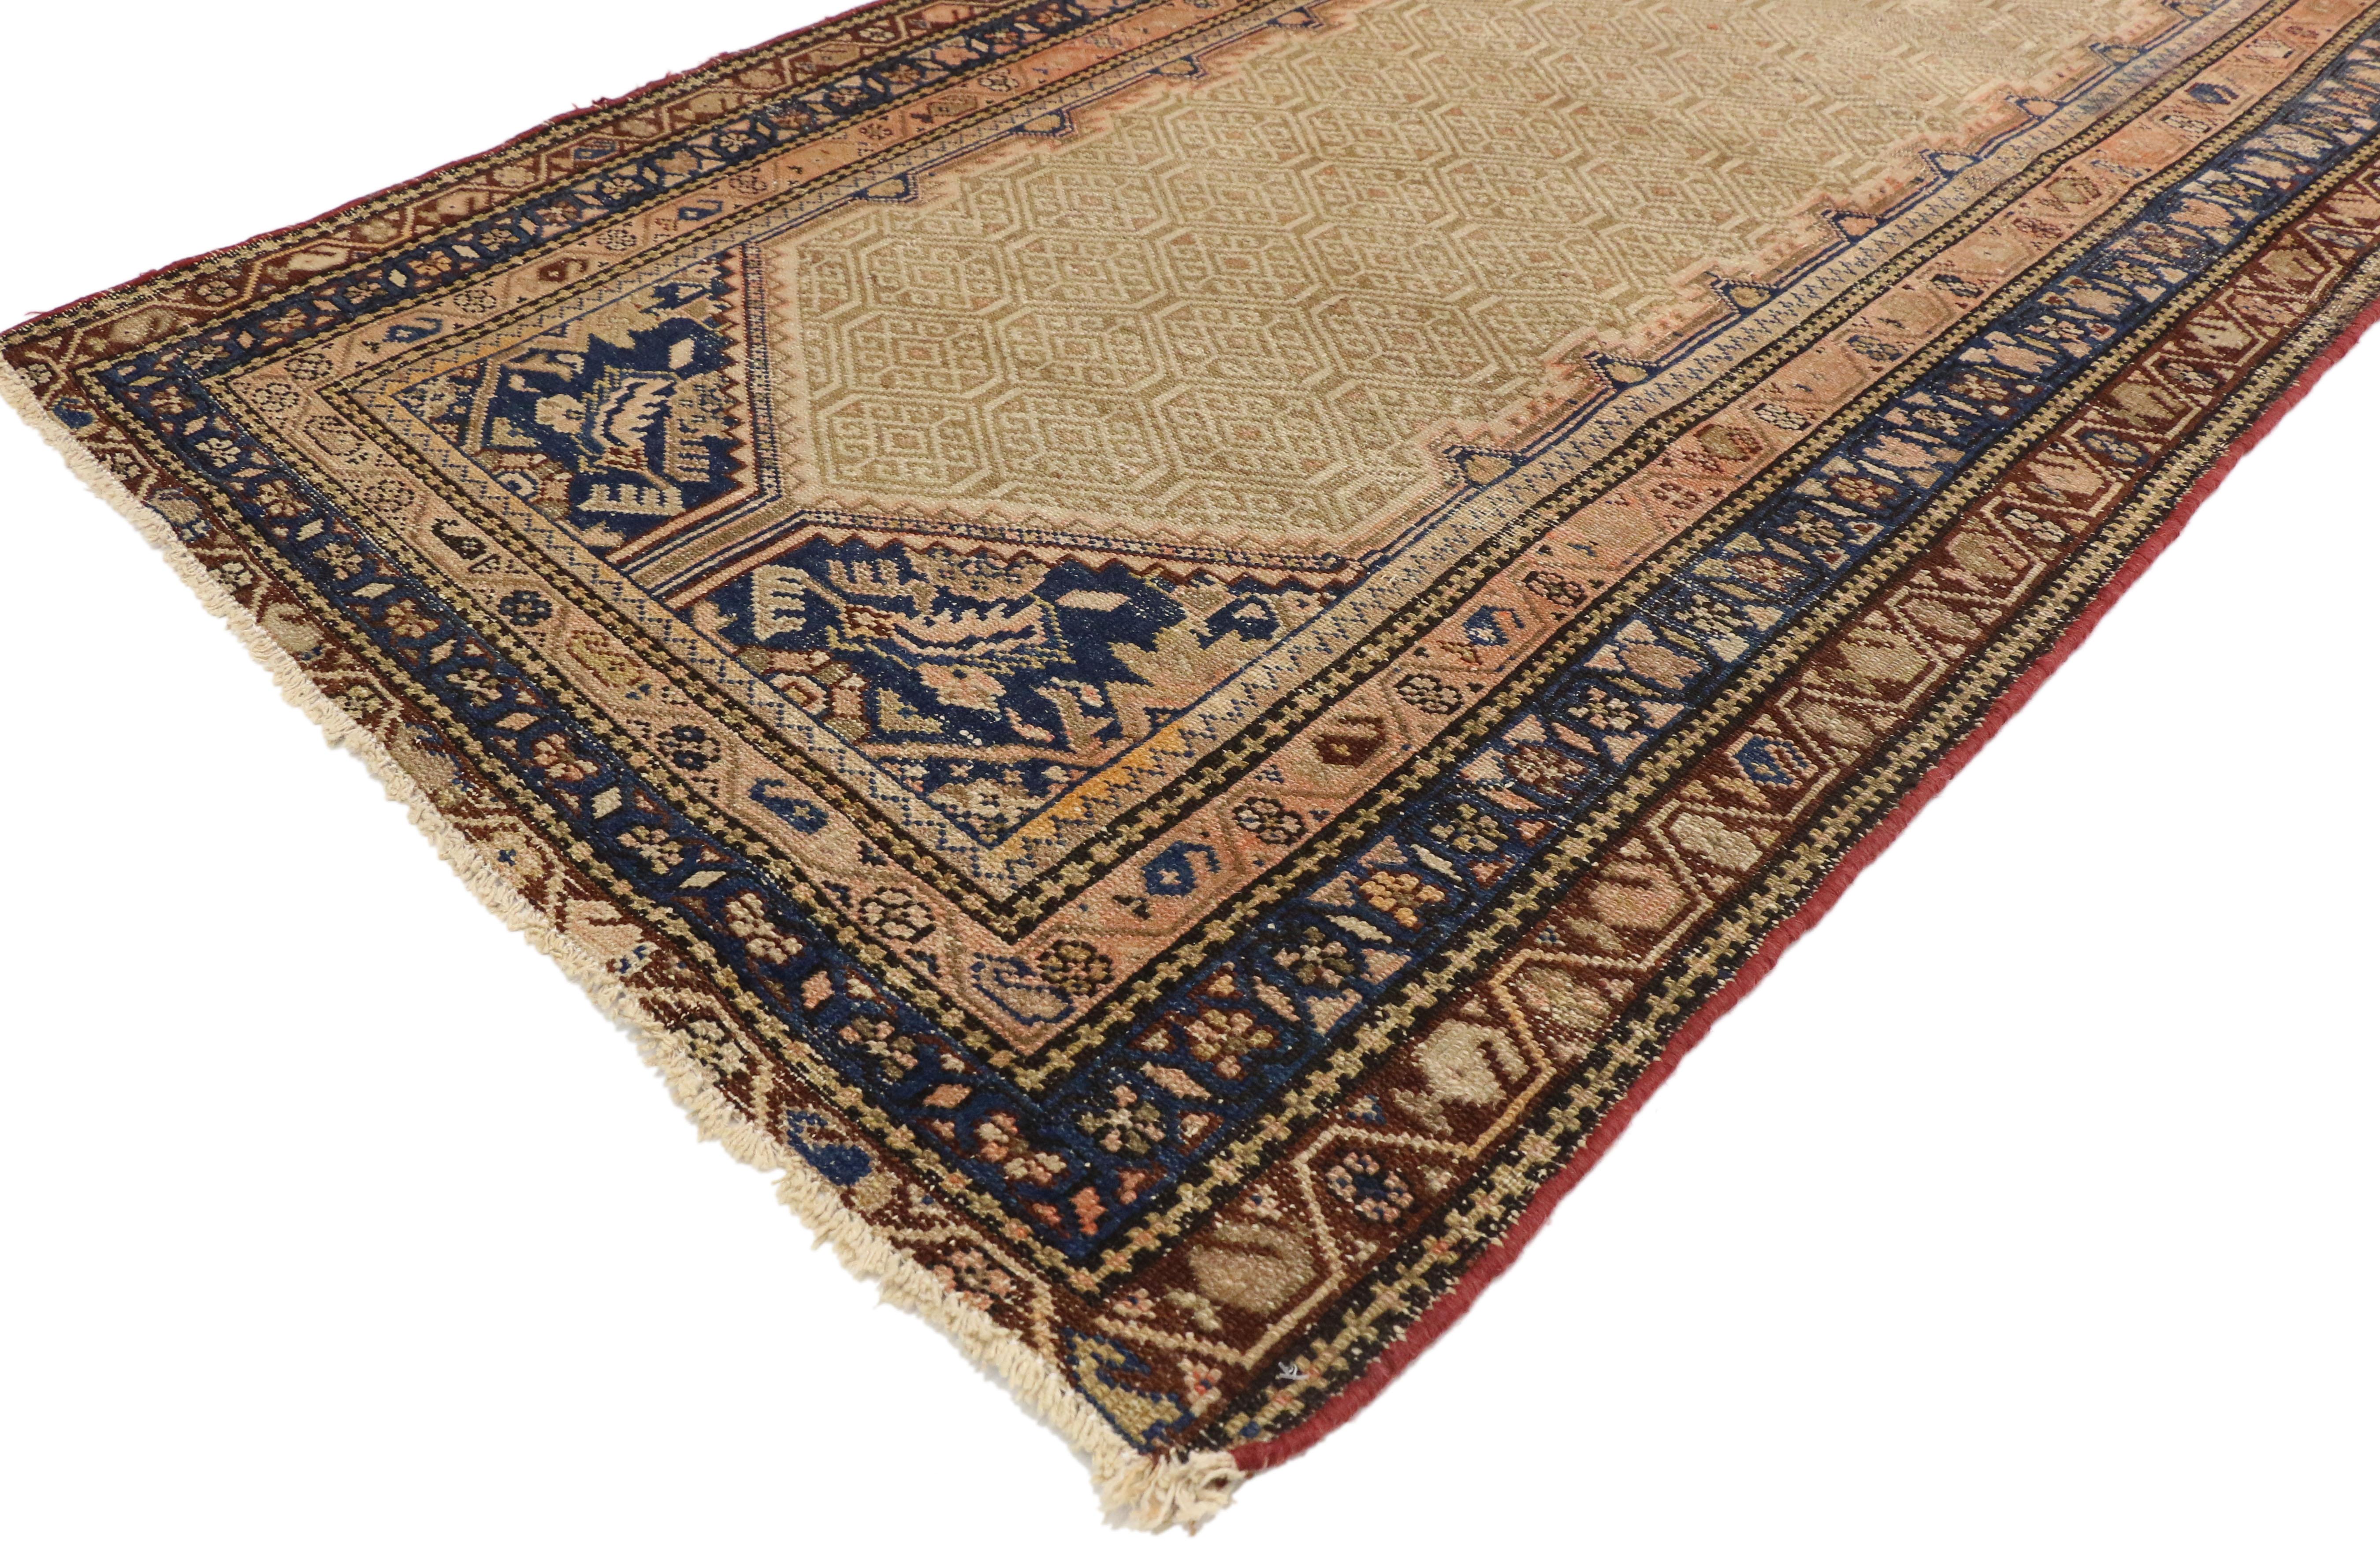 73481, distressed antique camel hair Persian Malayer runner with warm, Feminine Rustic style. Warm, feminine rustic style meets unpretentious and simple. This hand knotted wool distressed antique Persian Malayer runner features a low contrast